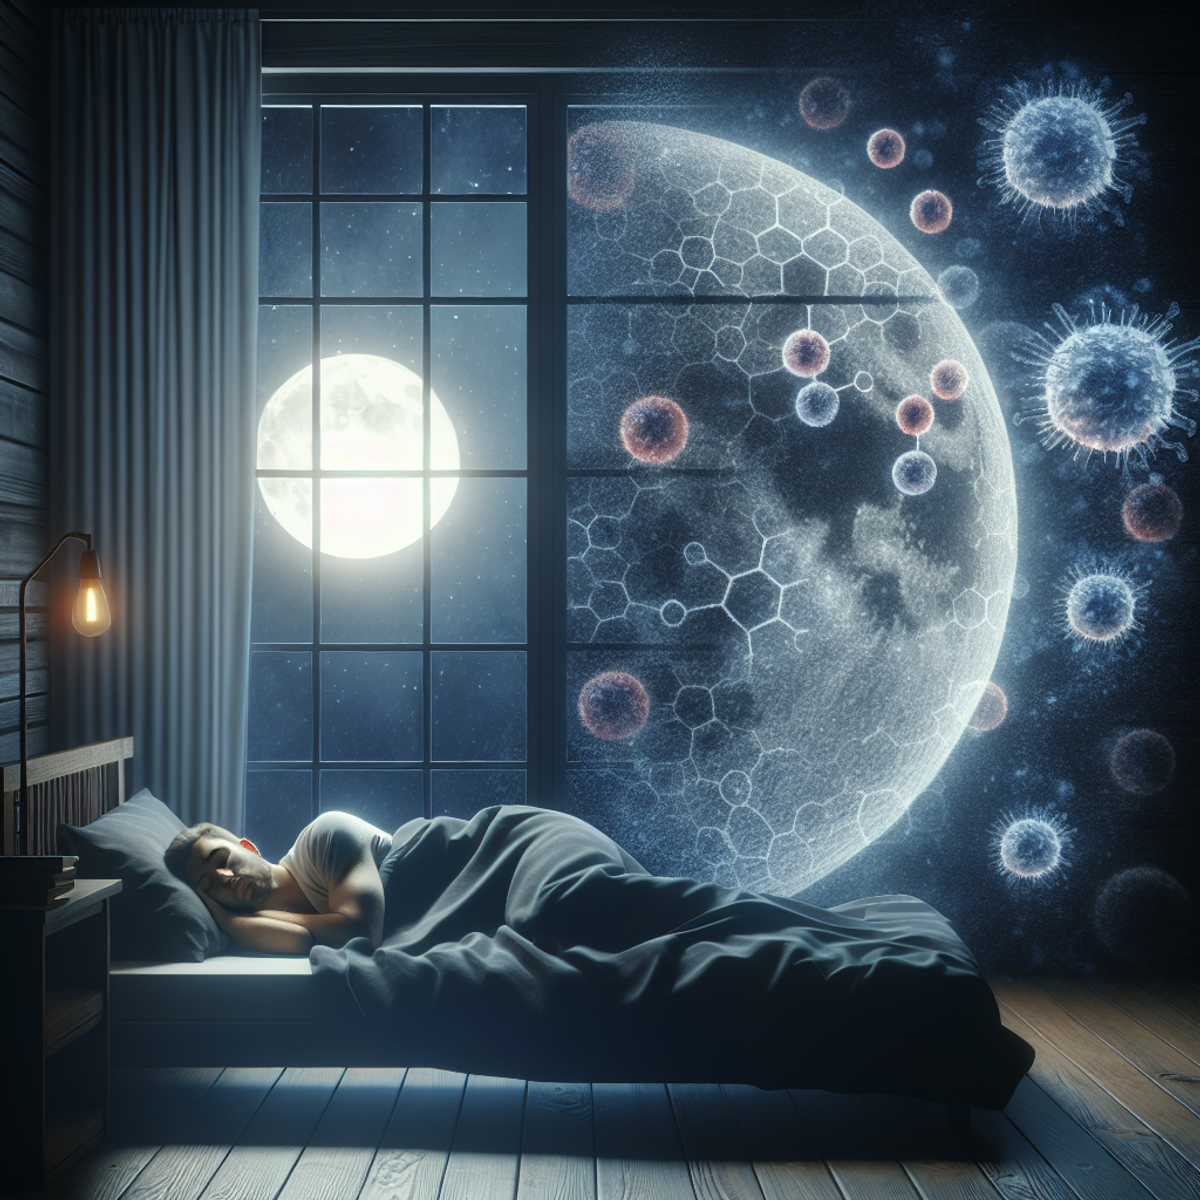 A person sleeping peacefully in a moonlit bedroom, with an immune cell and melatonin molecules in the background.